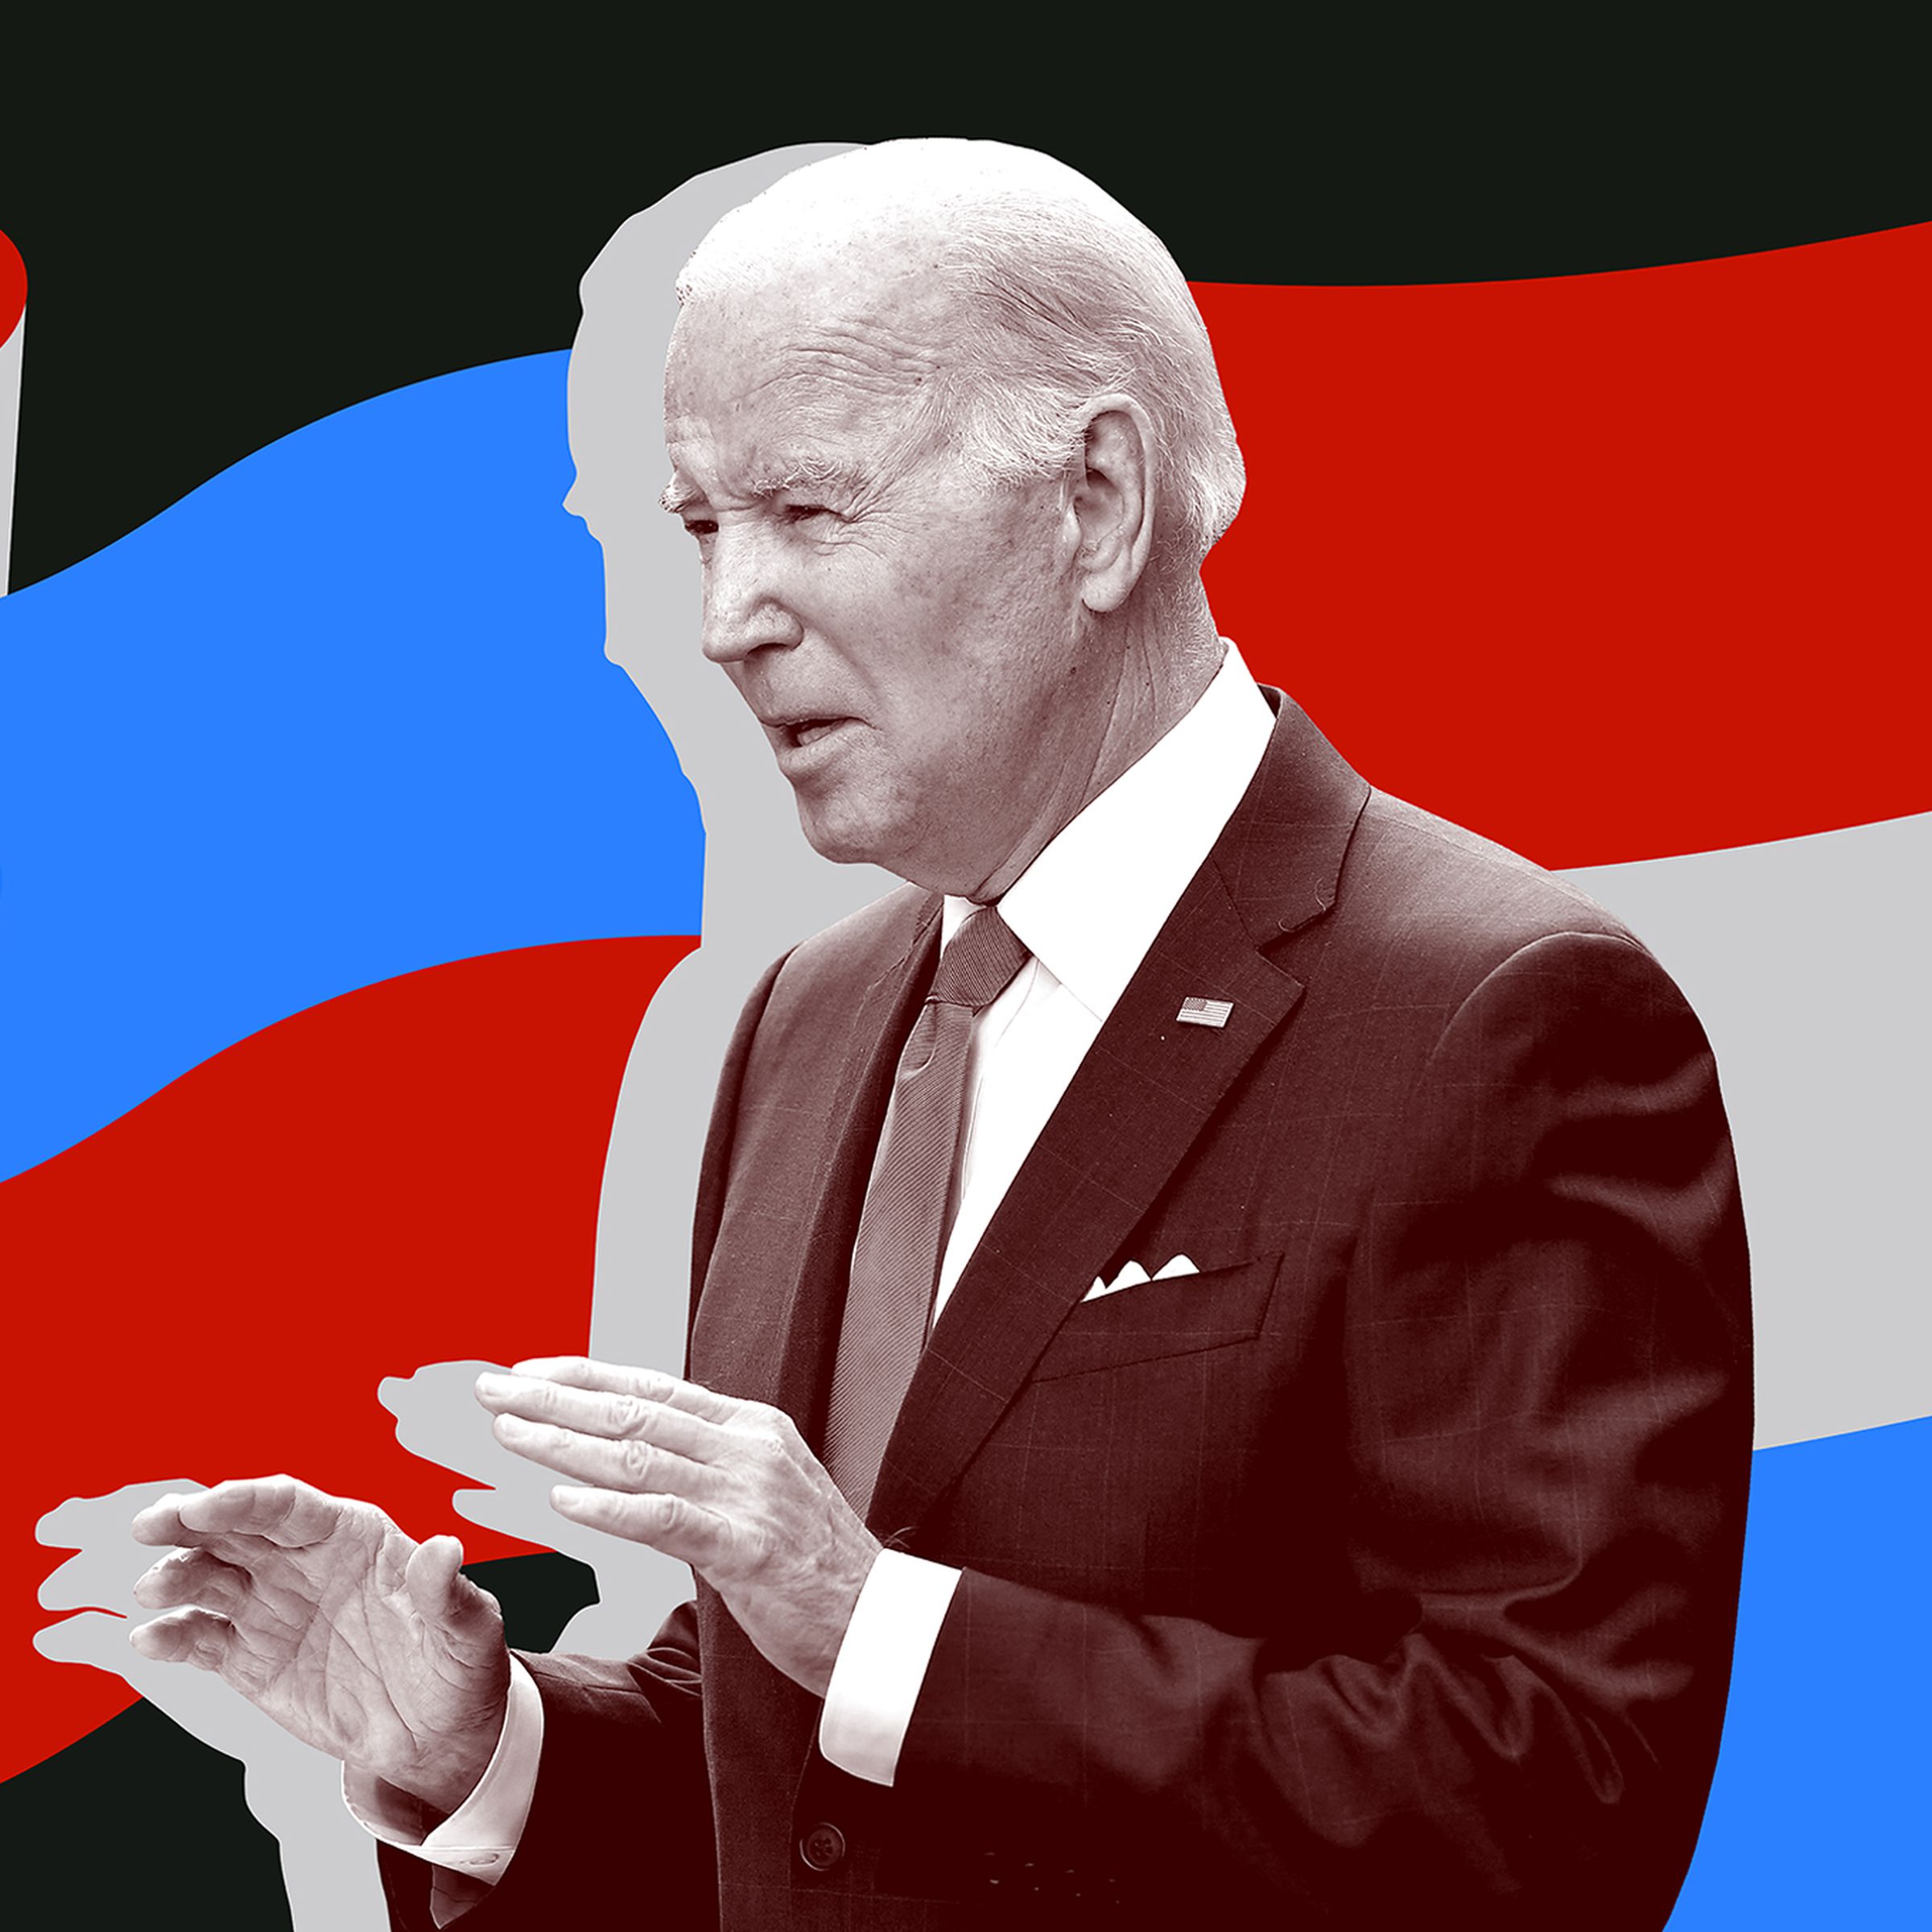 A picture of Joe Biden with red and blue graphics.